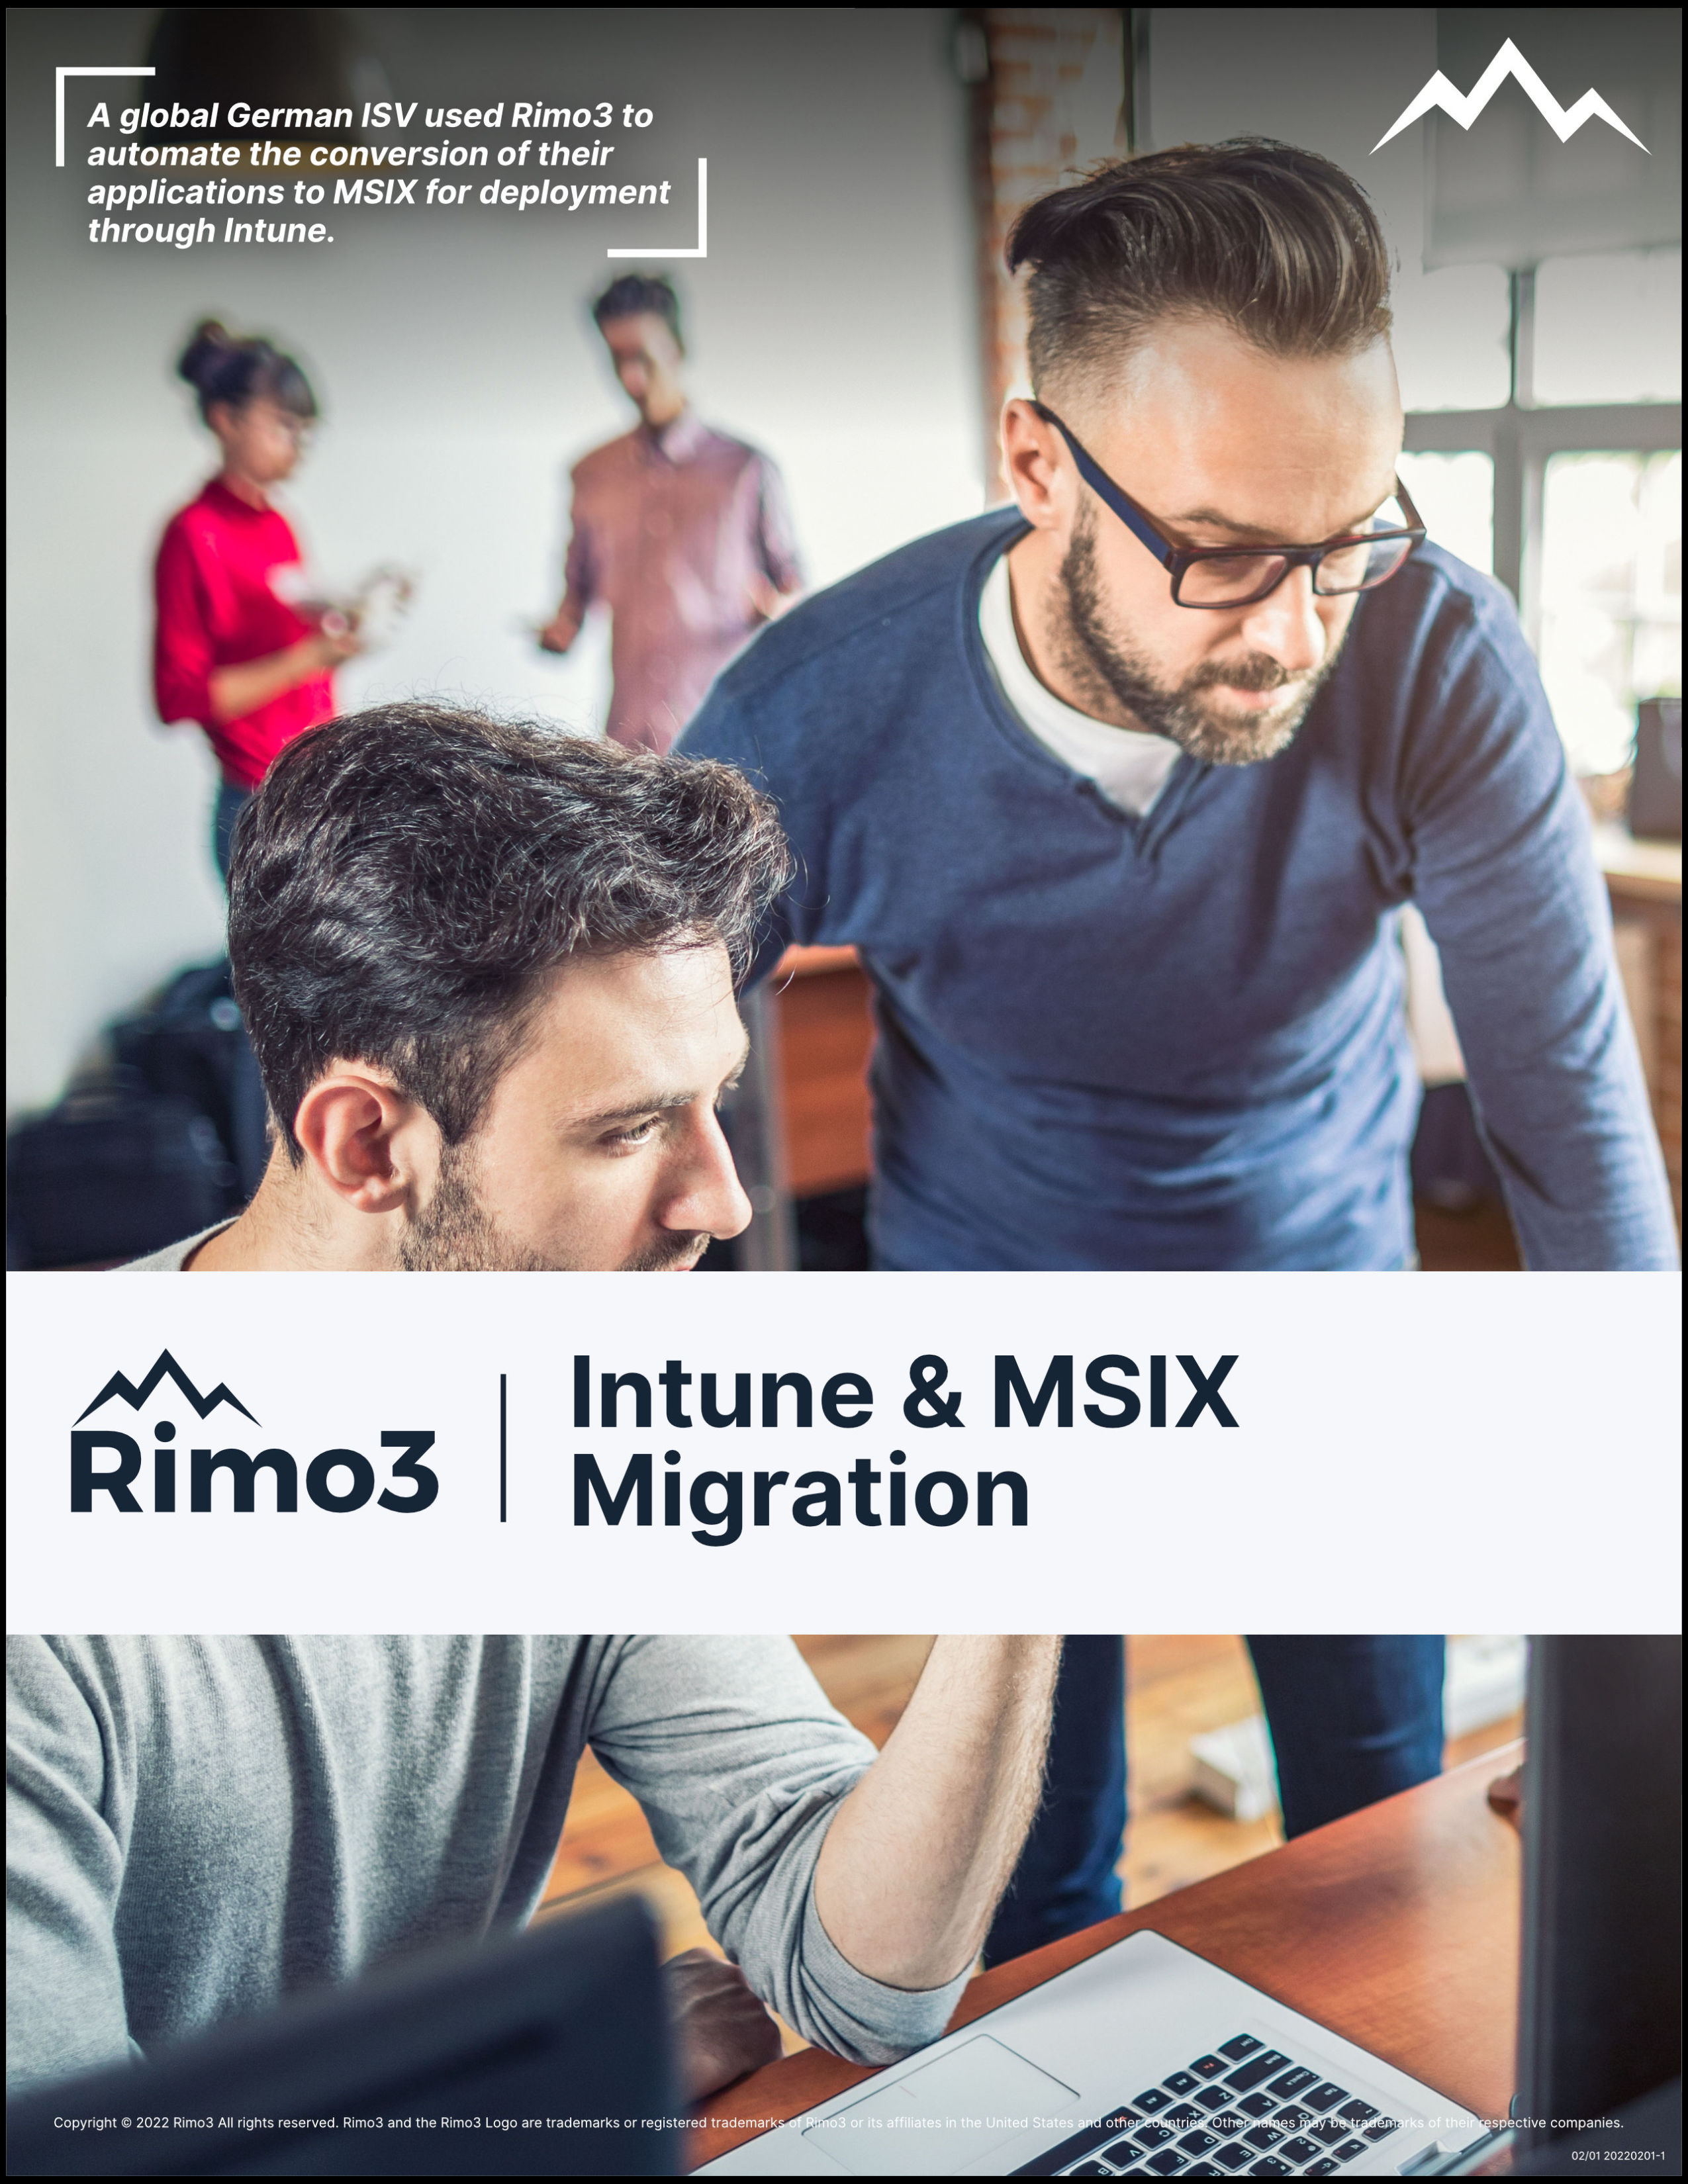 Rimo3 Intune & MSIX MIgration Page 1-1